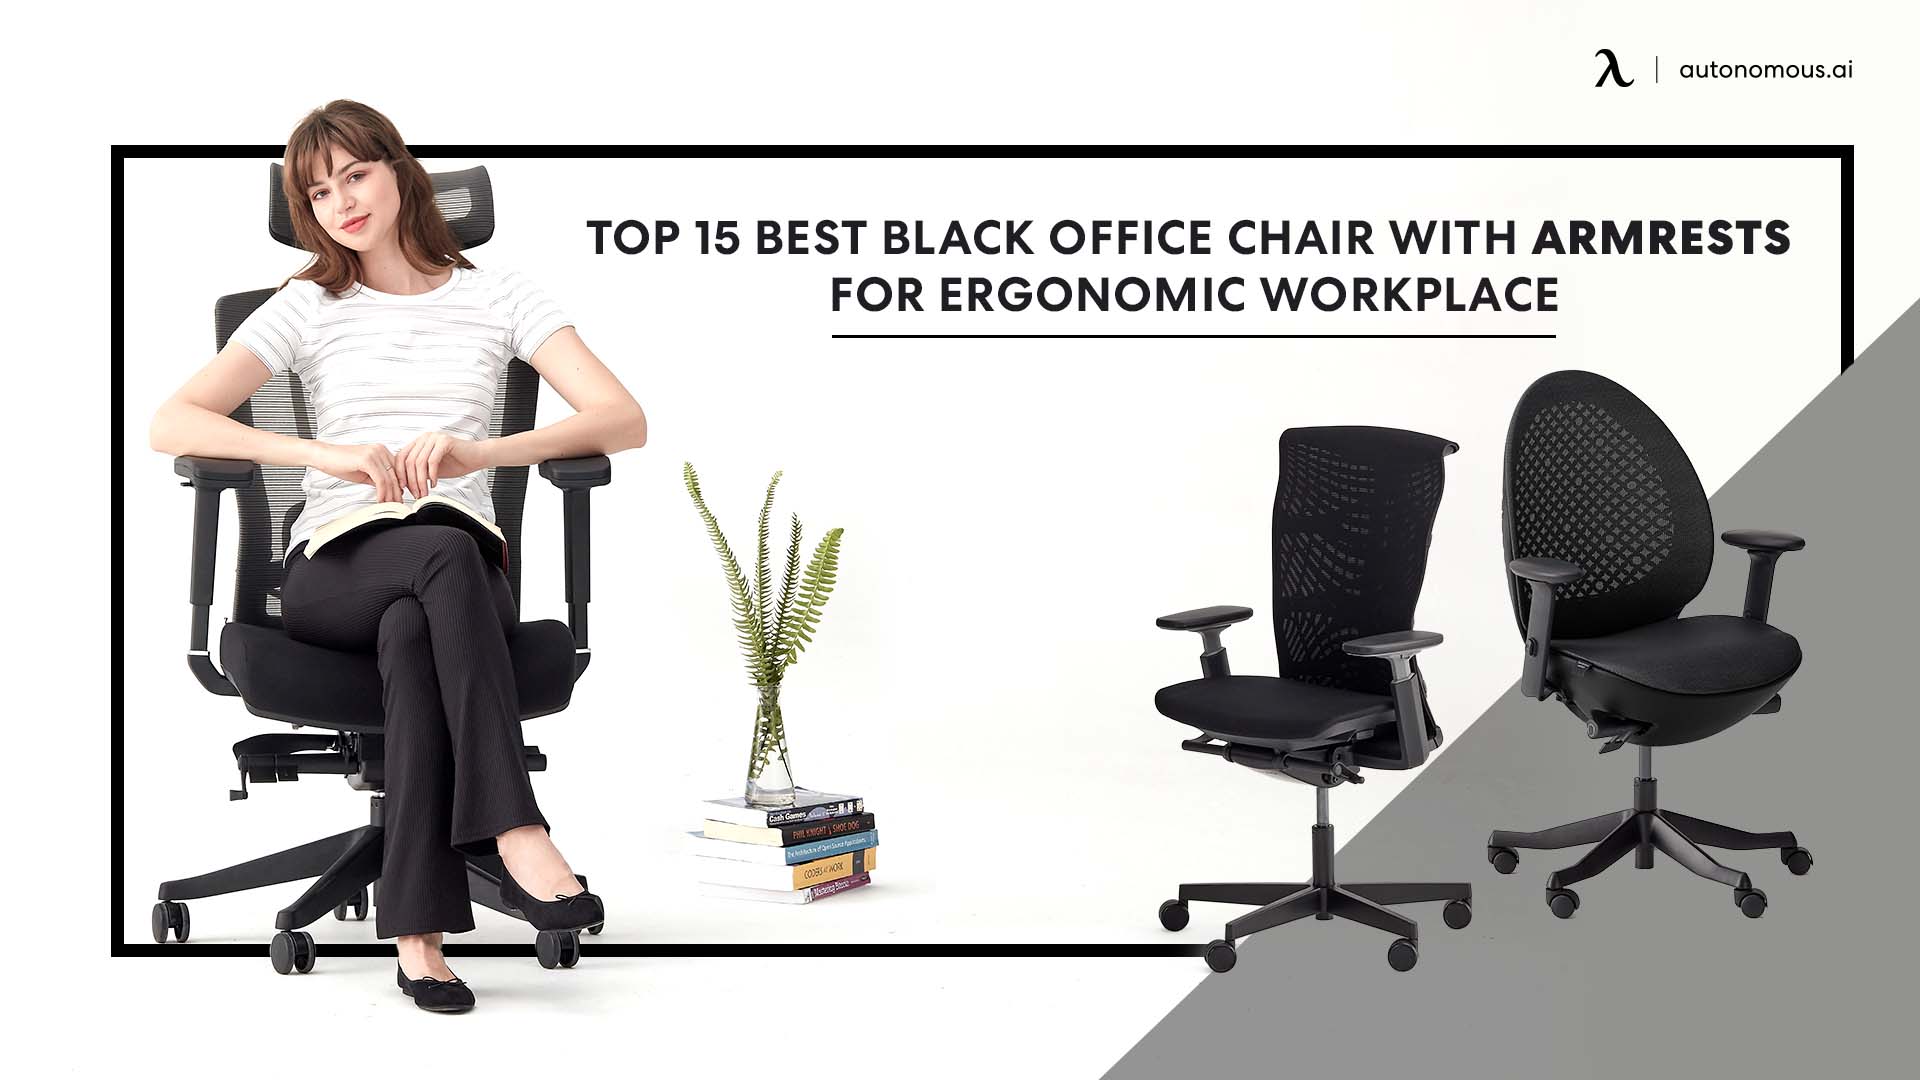 Top 15 Best Black Office Chair with Armrests for Ergonomic Workplace